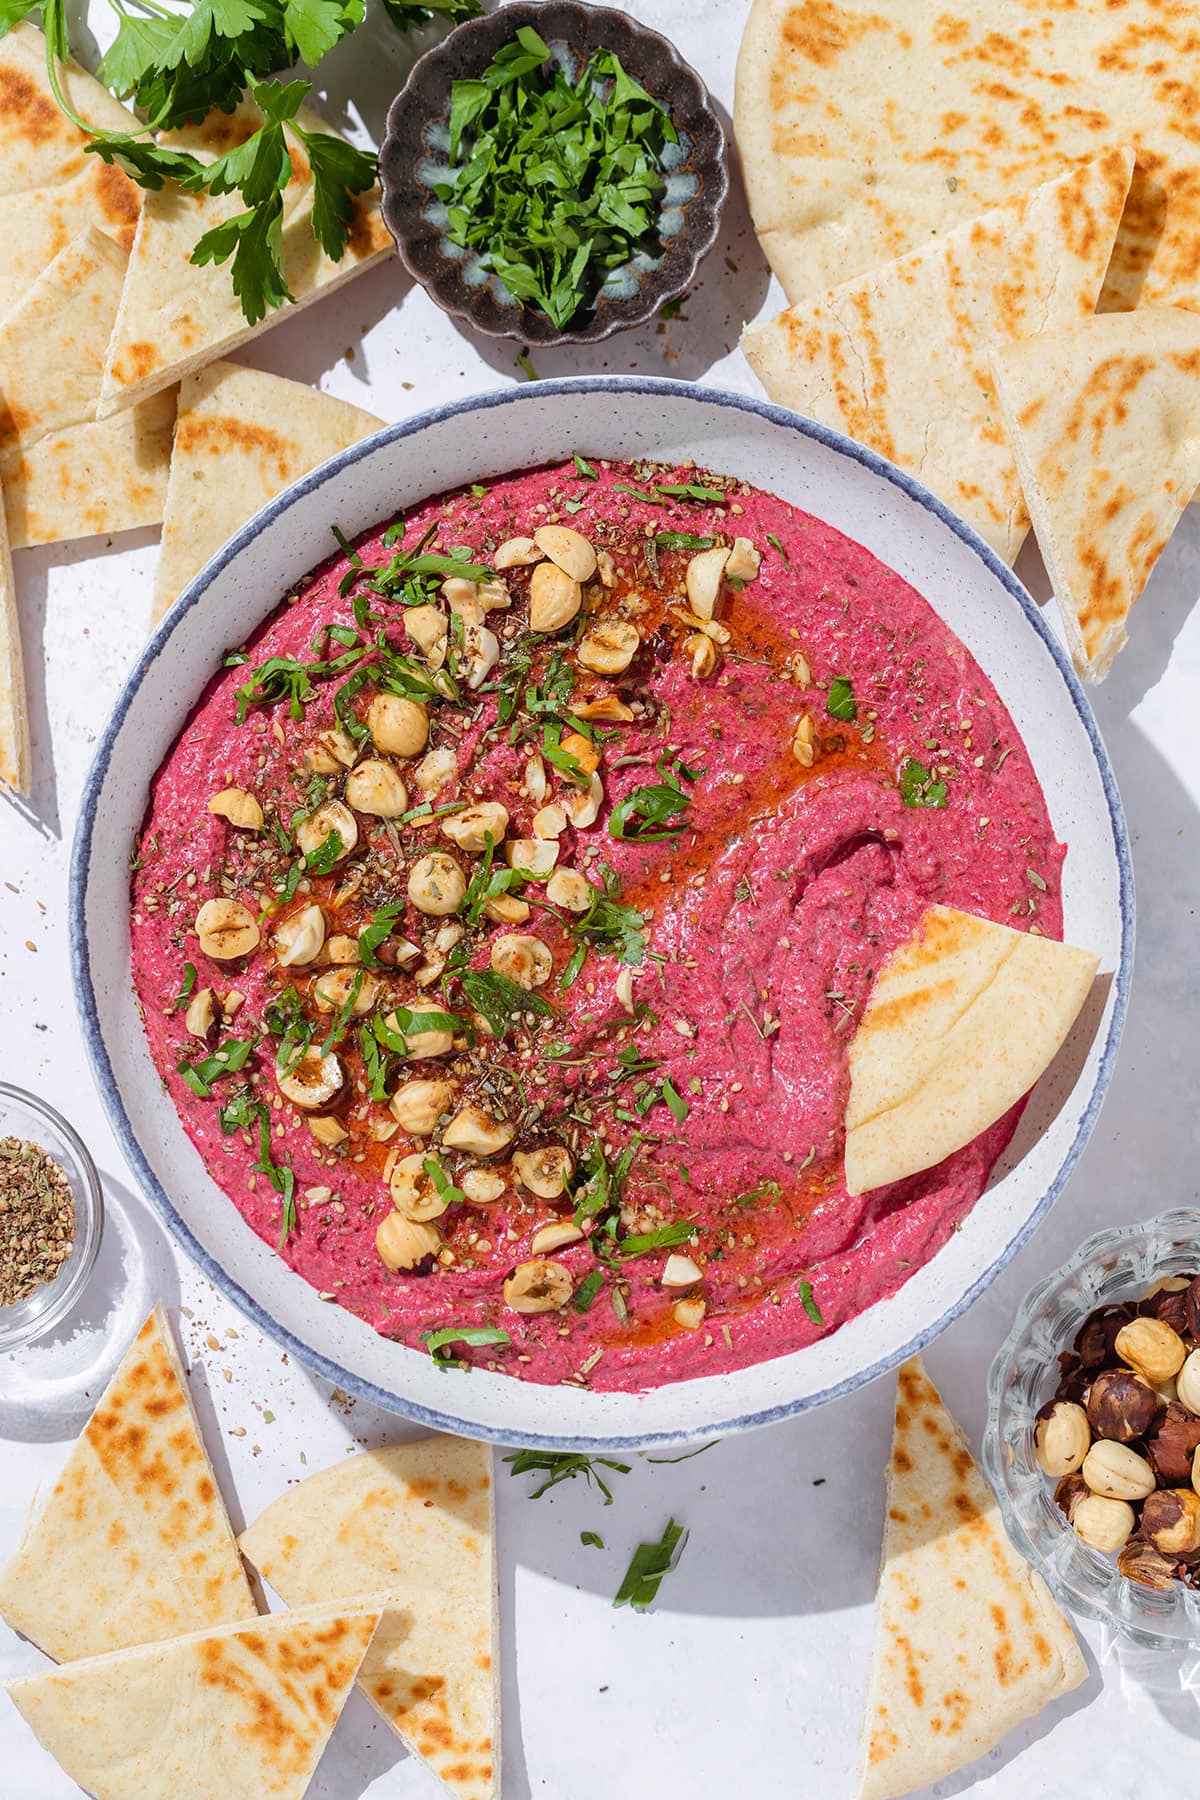 Bright pink beet dip in a white bowl with a blue rim garnished with hazelnuts, parsley, and olive oil with a naan triangle dipped into the dip.